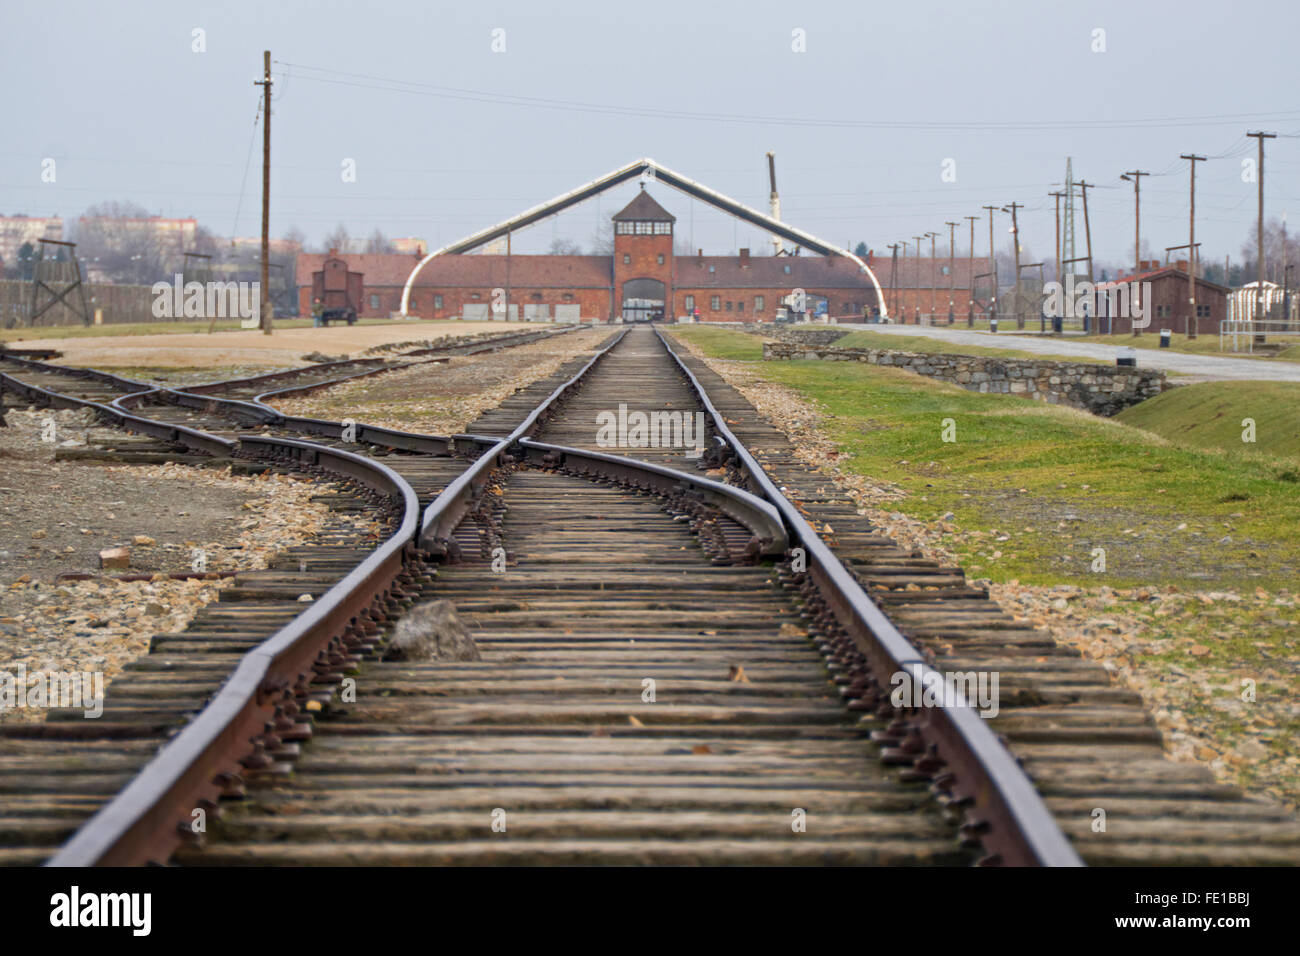 Railway leading to the entrance of the Nazi death camp at Auschwitz in Poland. Stock Photo